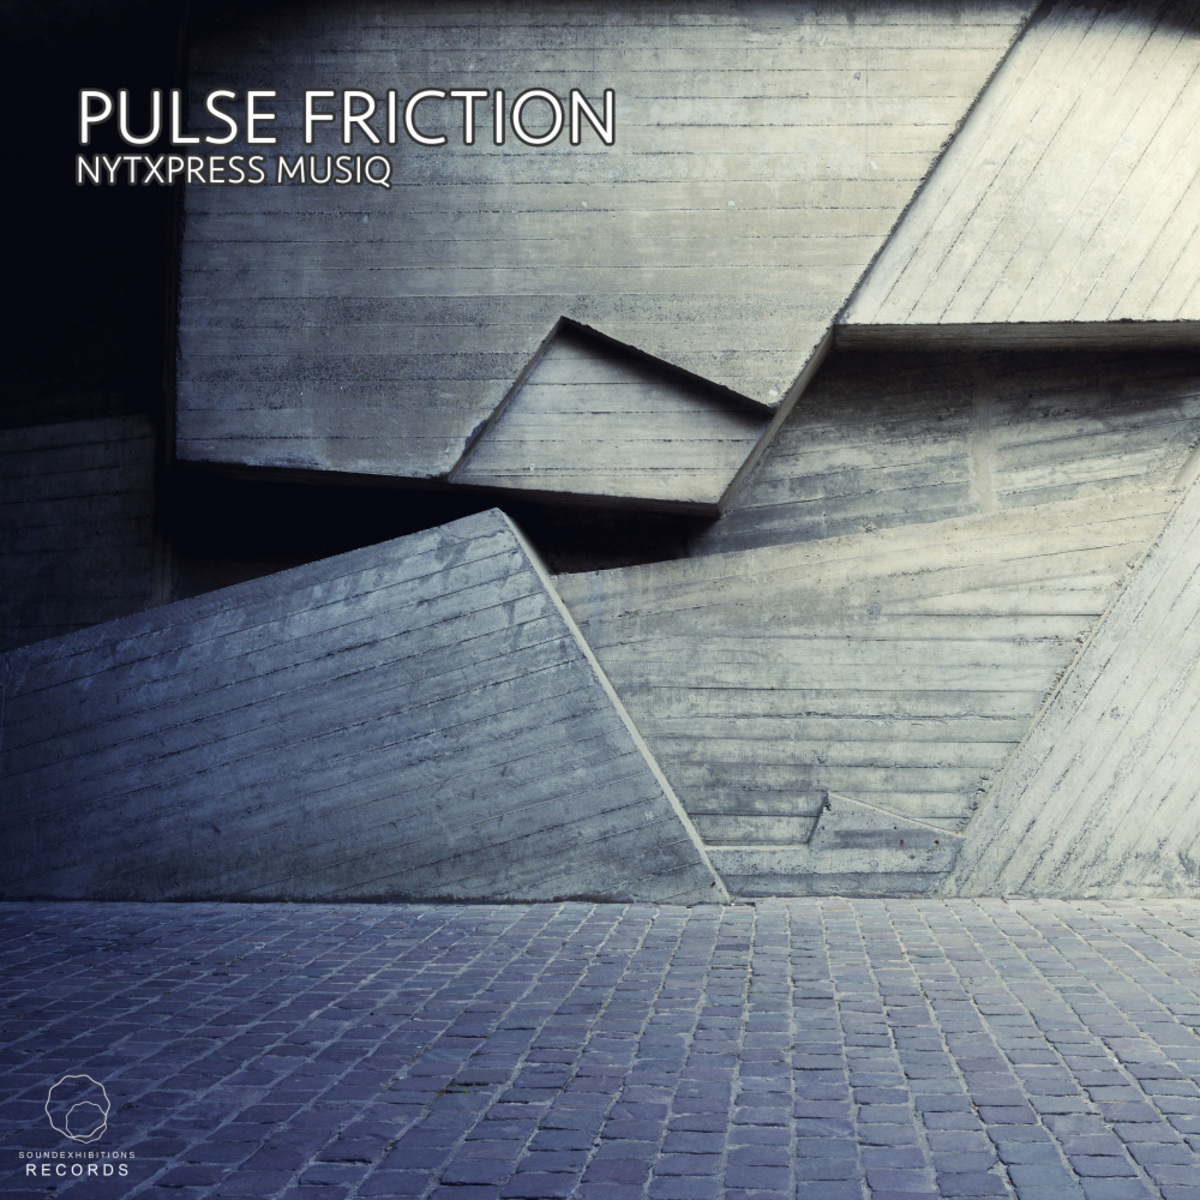 NytXpress Musiq - Pulse Friction / Sound-Exhibitions-Records